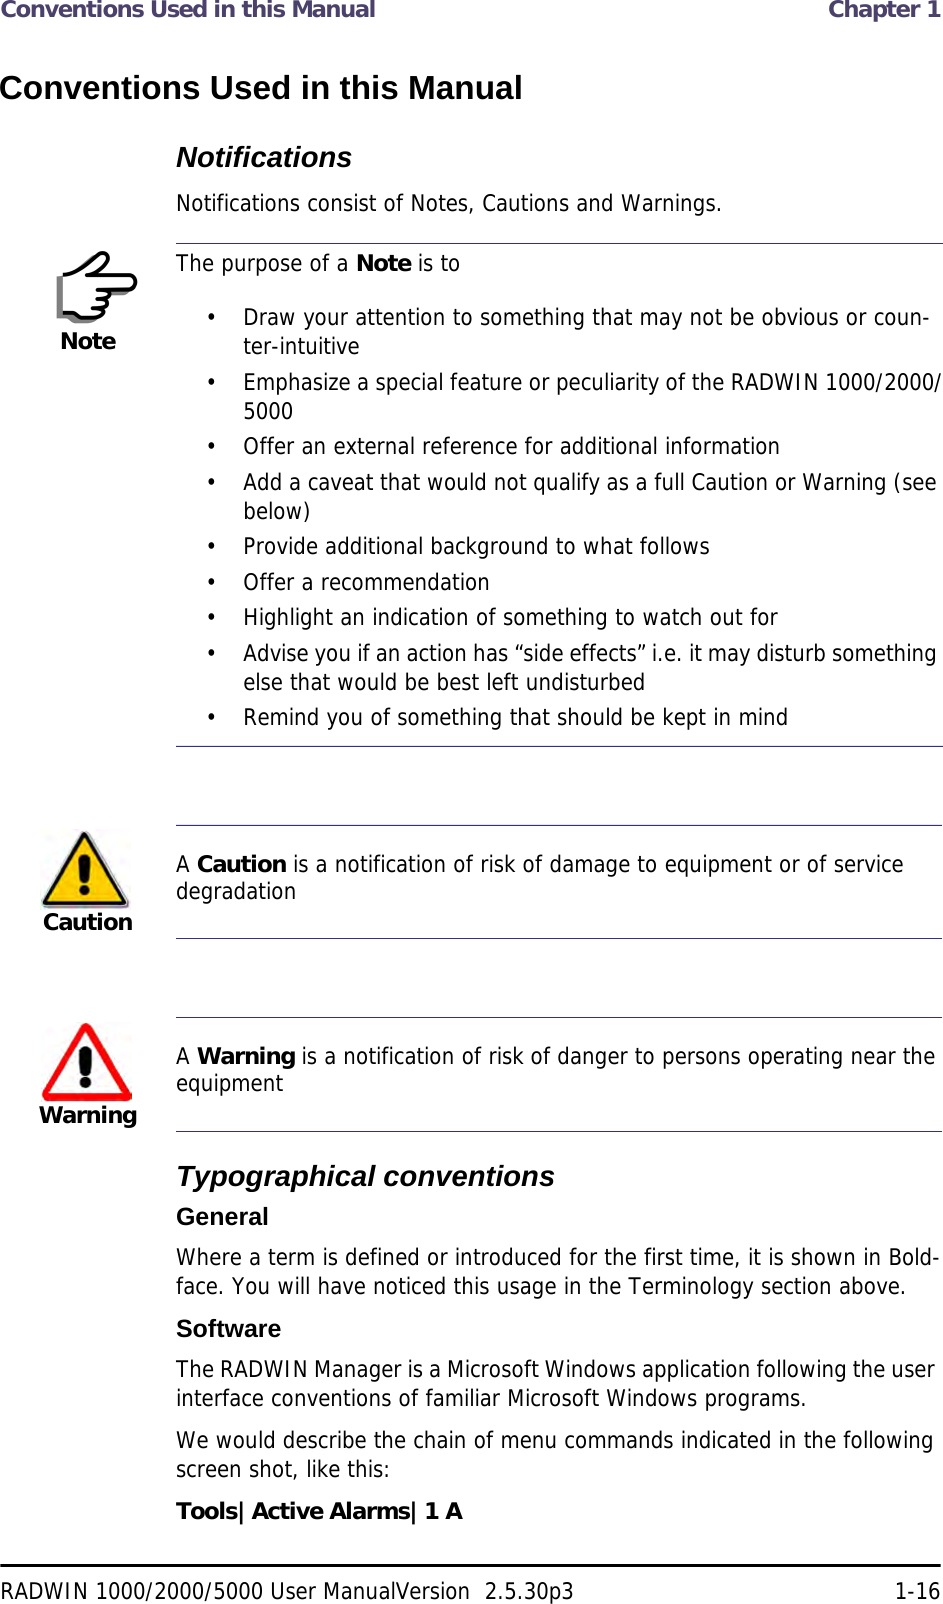 Conventions Used in this Manual  Chapter 1RADWIN 1000/2000/5000 User ManualVersion  2.5.30p3 1-16Conventions Used in this ManualNotificationsNotifications consist of Notes, Cautions and Warnings.Typographical conventionsGeneralWhere a term is defined or introduced for the first time, it is shown in Bold-face. You will have noticed this usage in the Terminology section above.SoftwareThe RADWIN Manager is a Microsoft Windows application following the user interface conventions of familiar Microsoft Windows programs.We would describe the chain of menu commands indicated in the following screen shot, like this:Tools|Active Alarms|1 ANoteThe purpose of a Note is to• Draw your attention to something that may not be obvious or coun-ter-intuitive• Emphasize a special feature or peculiarity of the RADWIN 1000/2000/5000• Offer an external reference for additional information• Add a caveat that would not qualify as a full Caution or Warning (see below)• Provide additional background to what follows• Offer a recommendation• Highlight an indication of something to watch out for• Advise you if an action has “side effects” i.e. it may disturb something else that would be best left undisturbed• Remind you of something that should be kept in mindCautionA Caution is a notification of risk of damage to equipment or of service degradationWarningA Warning is a notification of risk of danger to persons operating near the equipment